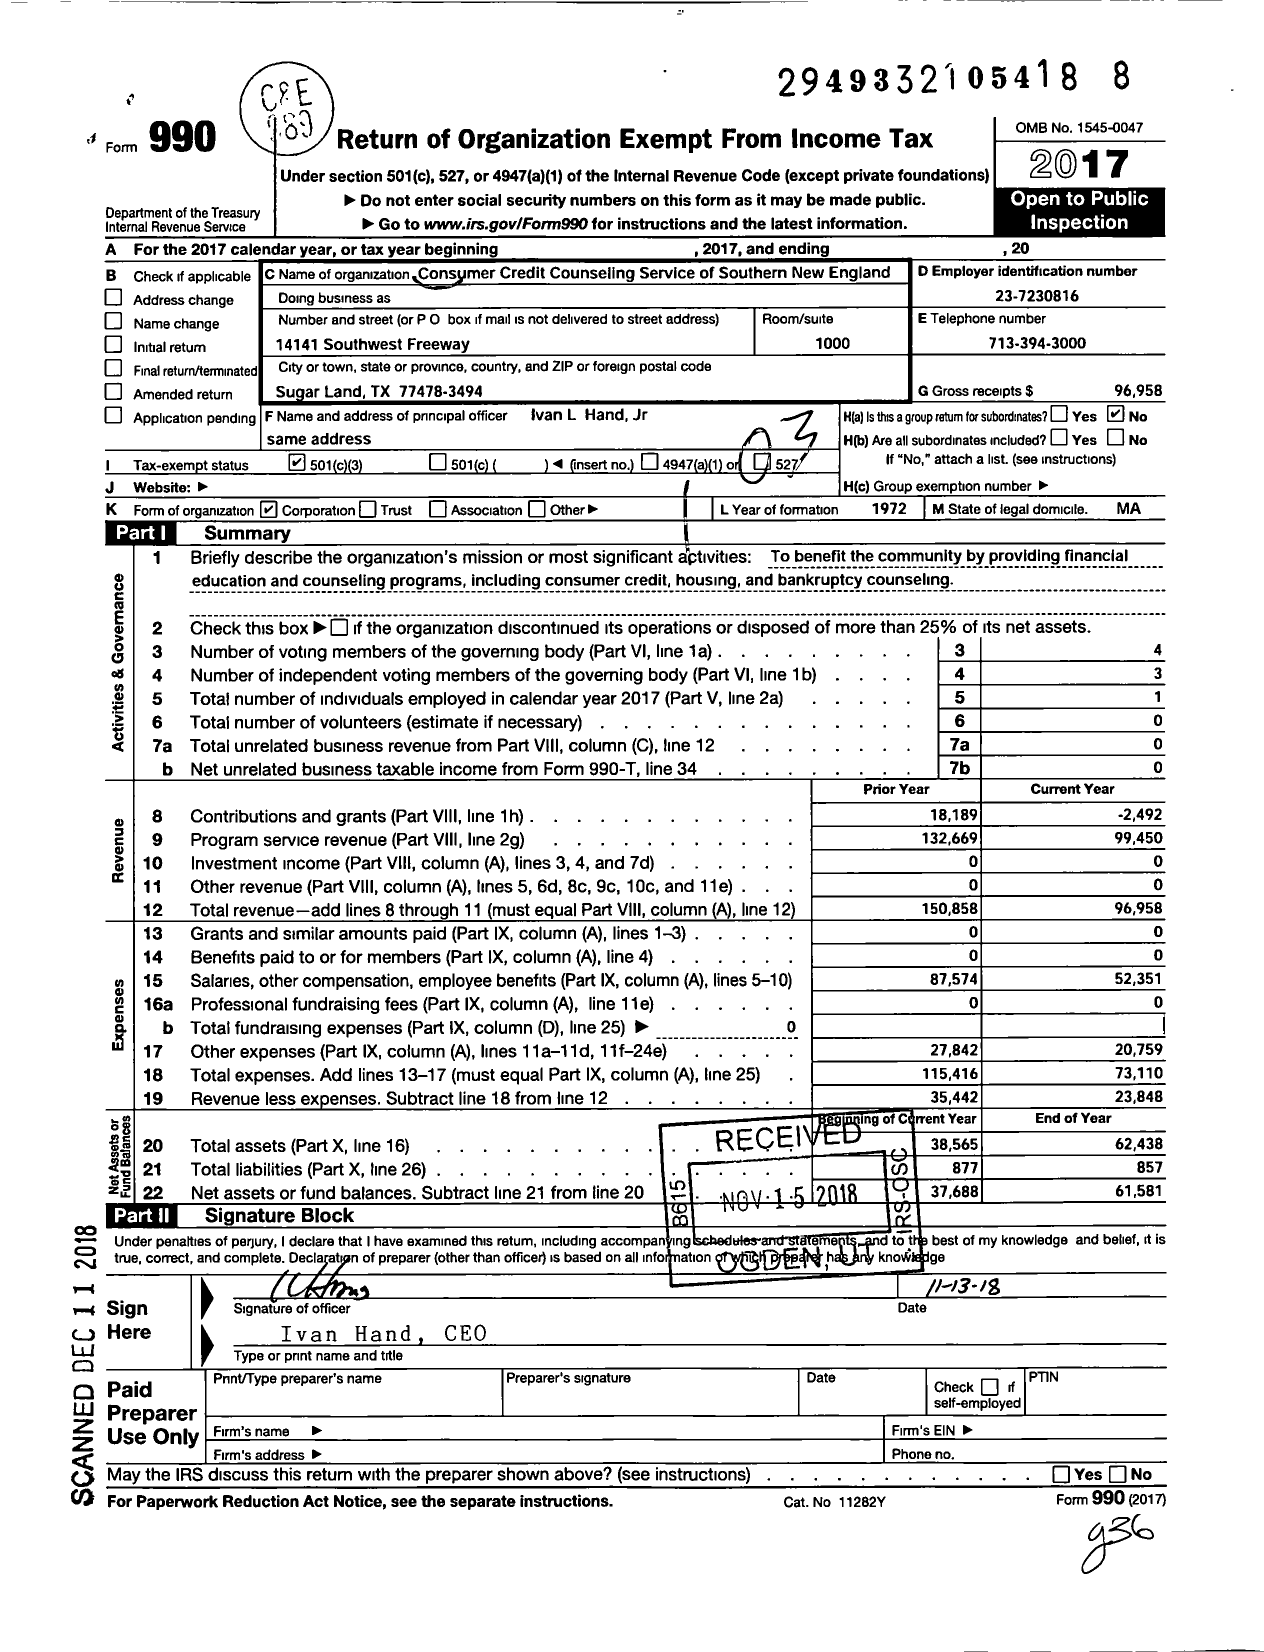 Image of first page of 2017 Form 990 for Consumer Credit Counseling Service of Southern New England